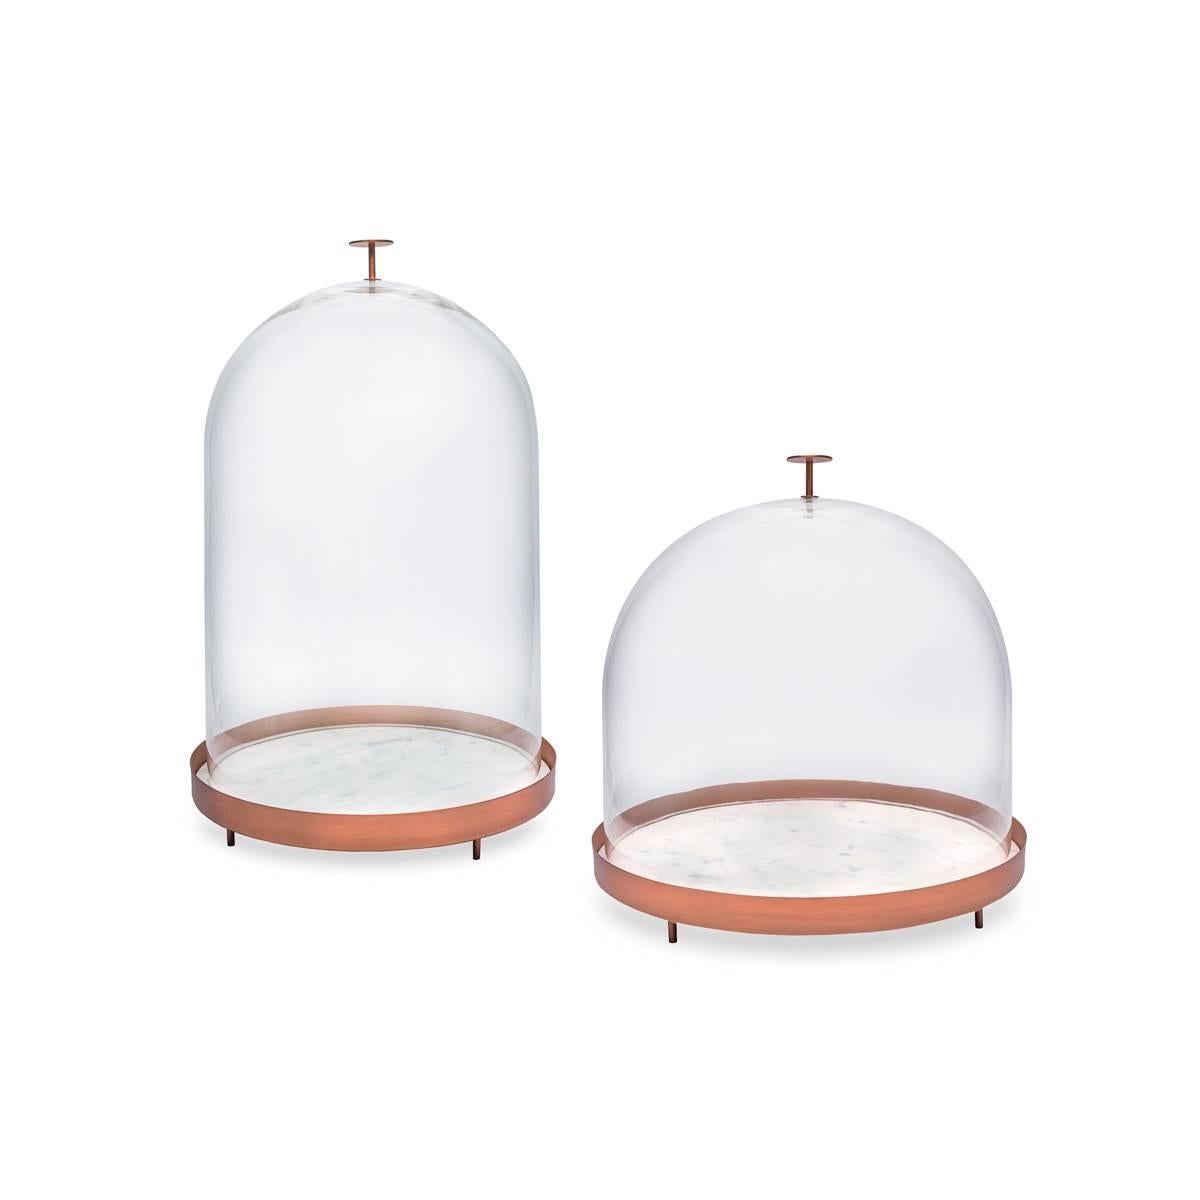 New Moon is a blown glass bell with a tray in Carrara marble and copper. This object is part of the Lunar Landscape collection designed by Elisa Ossino, who created a collection of tableware for Paola C., revisiting the classic themes of mise en